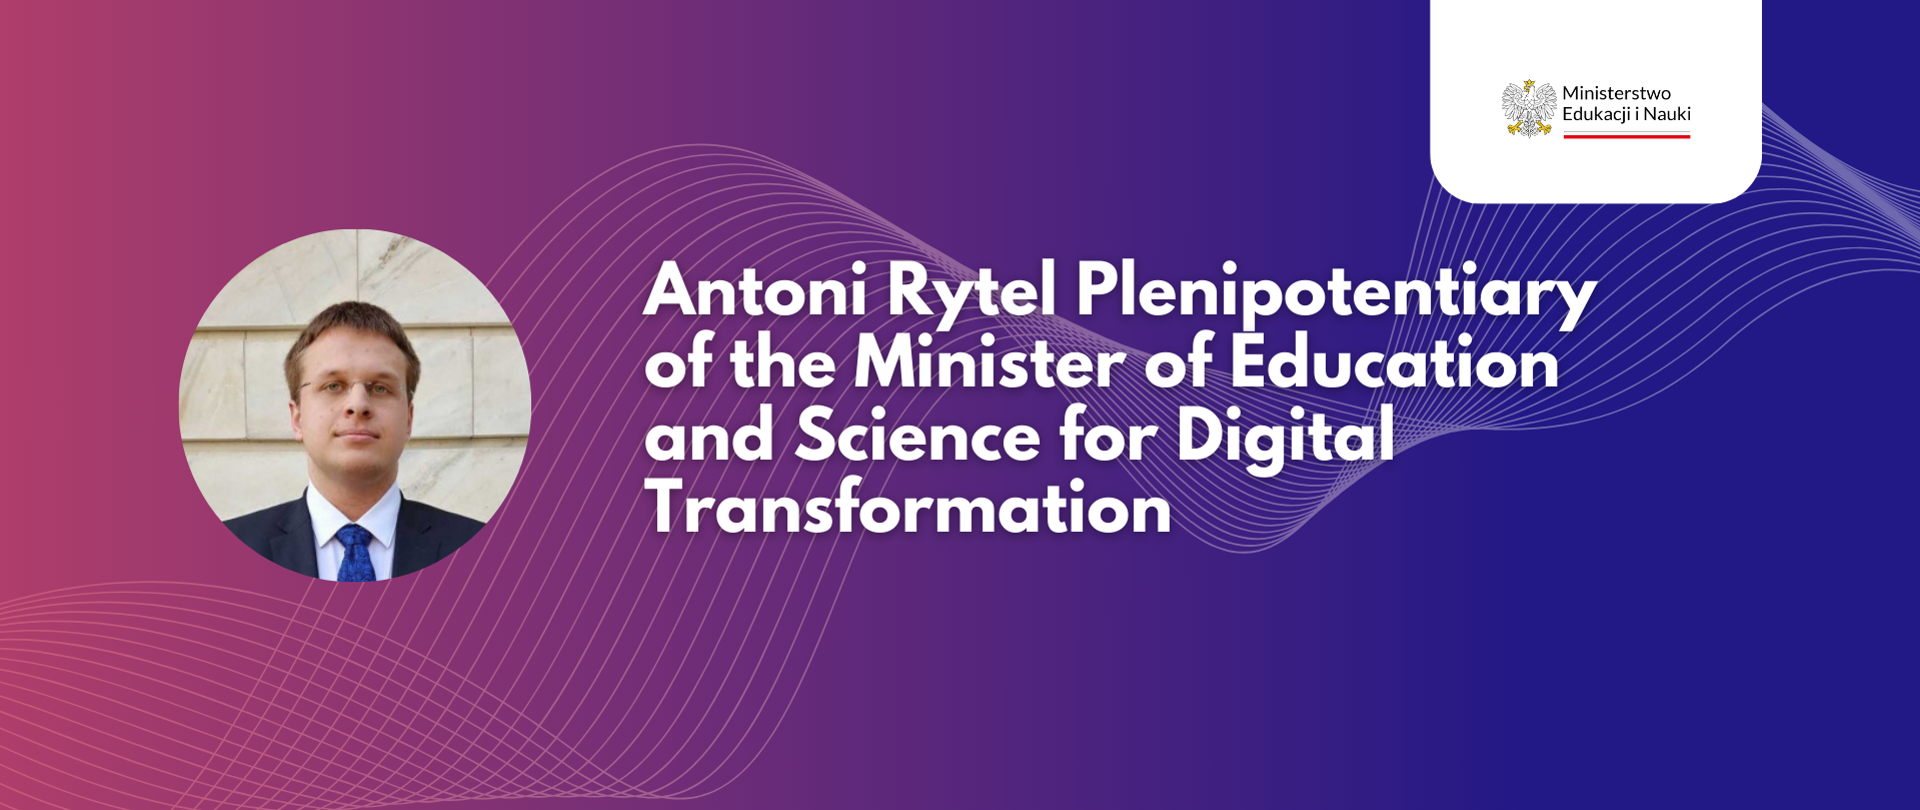 Antoni Rytel Plenipotentiary of the Minister of Education and Science for Digital Transformation